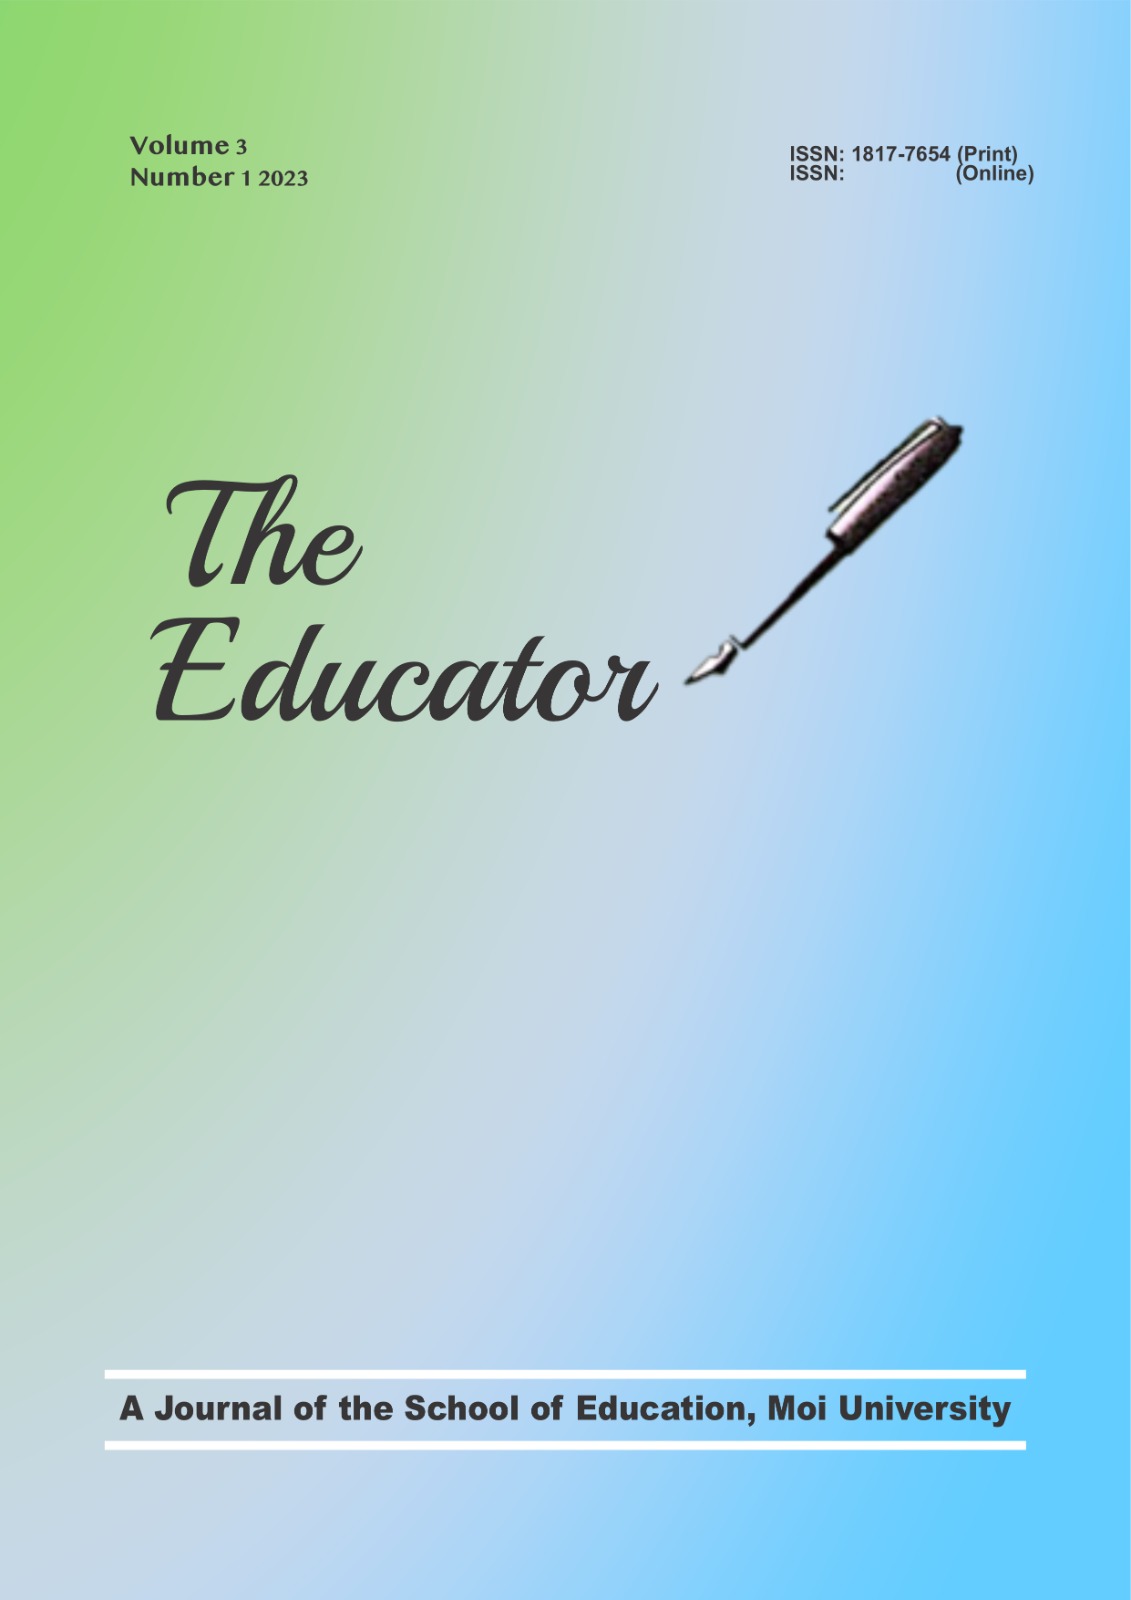 					View Vol. 4 No. 1 (2024): The Educator: A Journal of the School of Education, Moi University
				